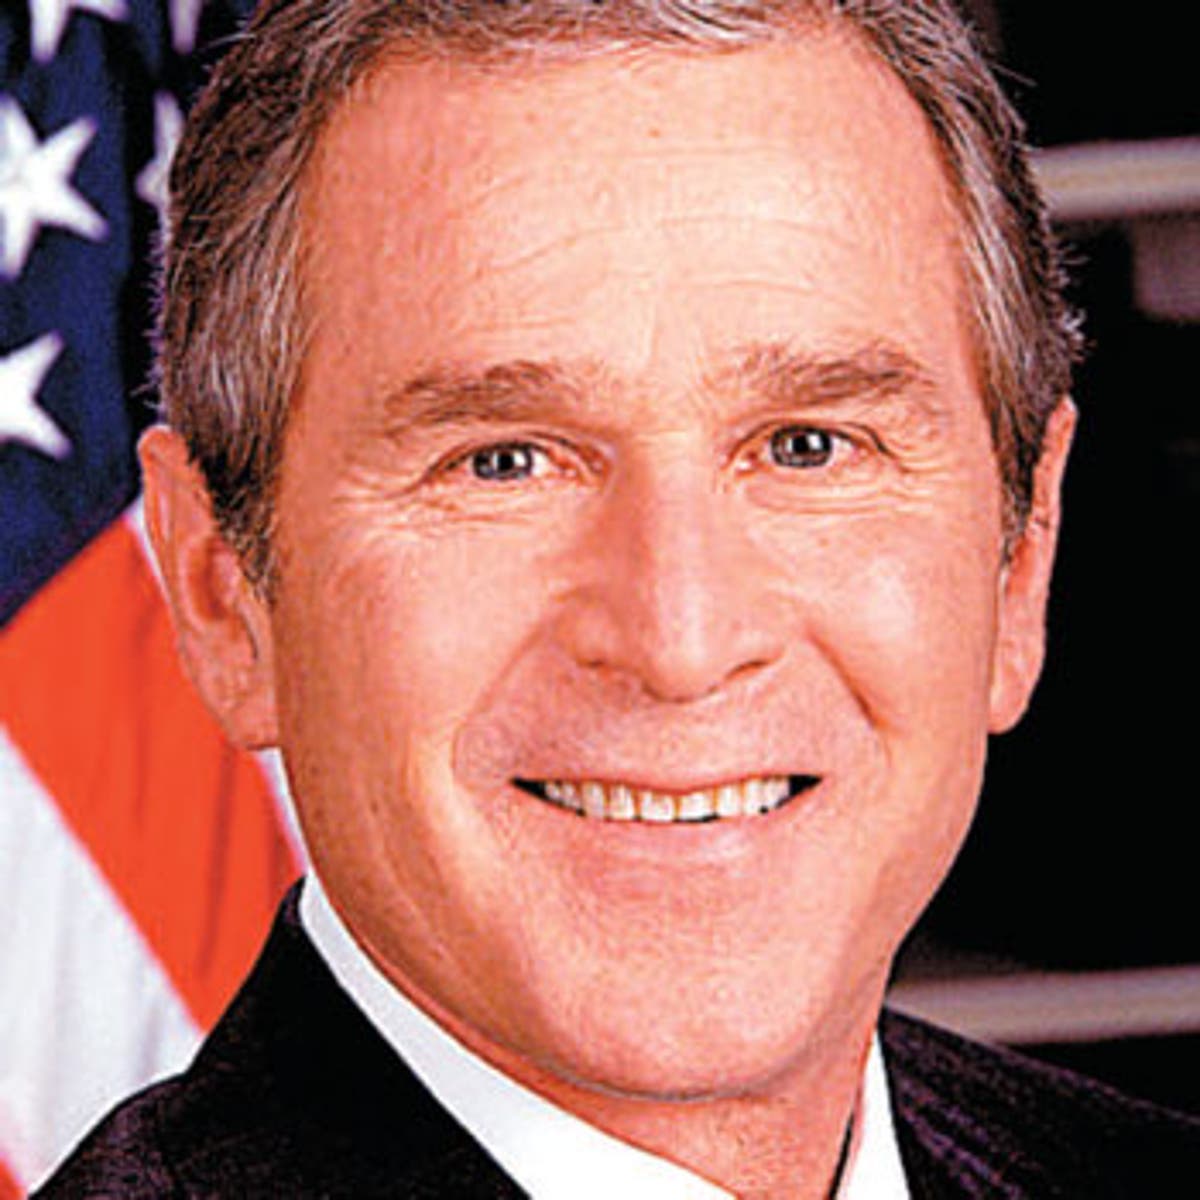 George W Bush 2001 2009 The Independent The Independent